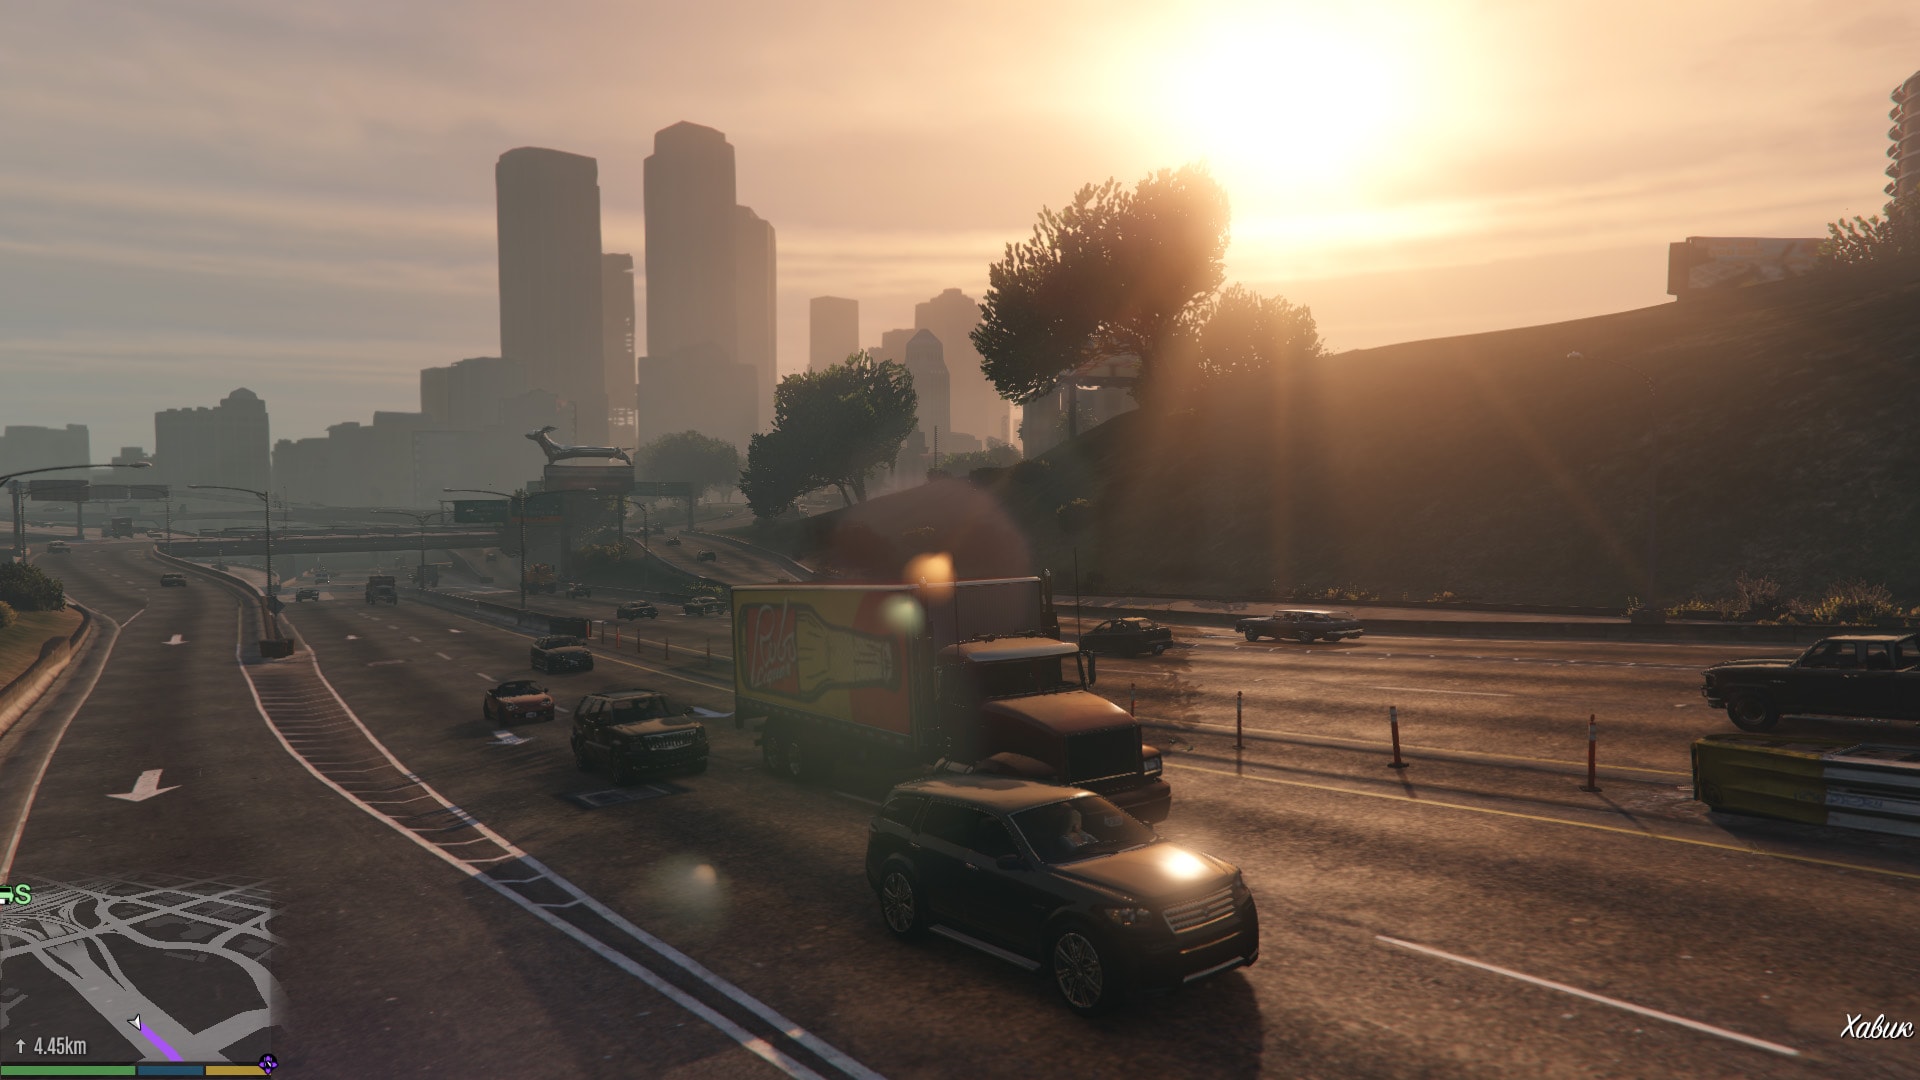 gta 5 full game free download for pc windows 10